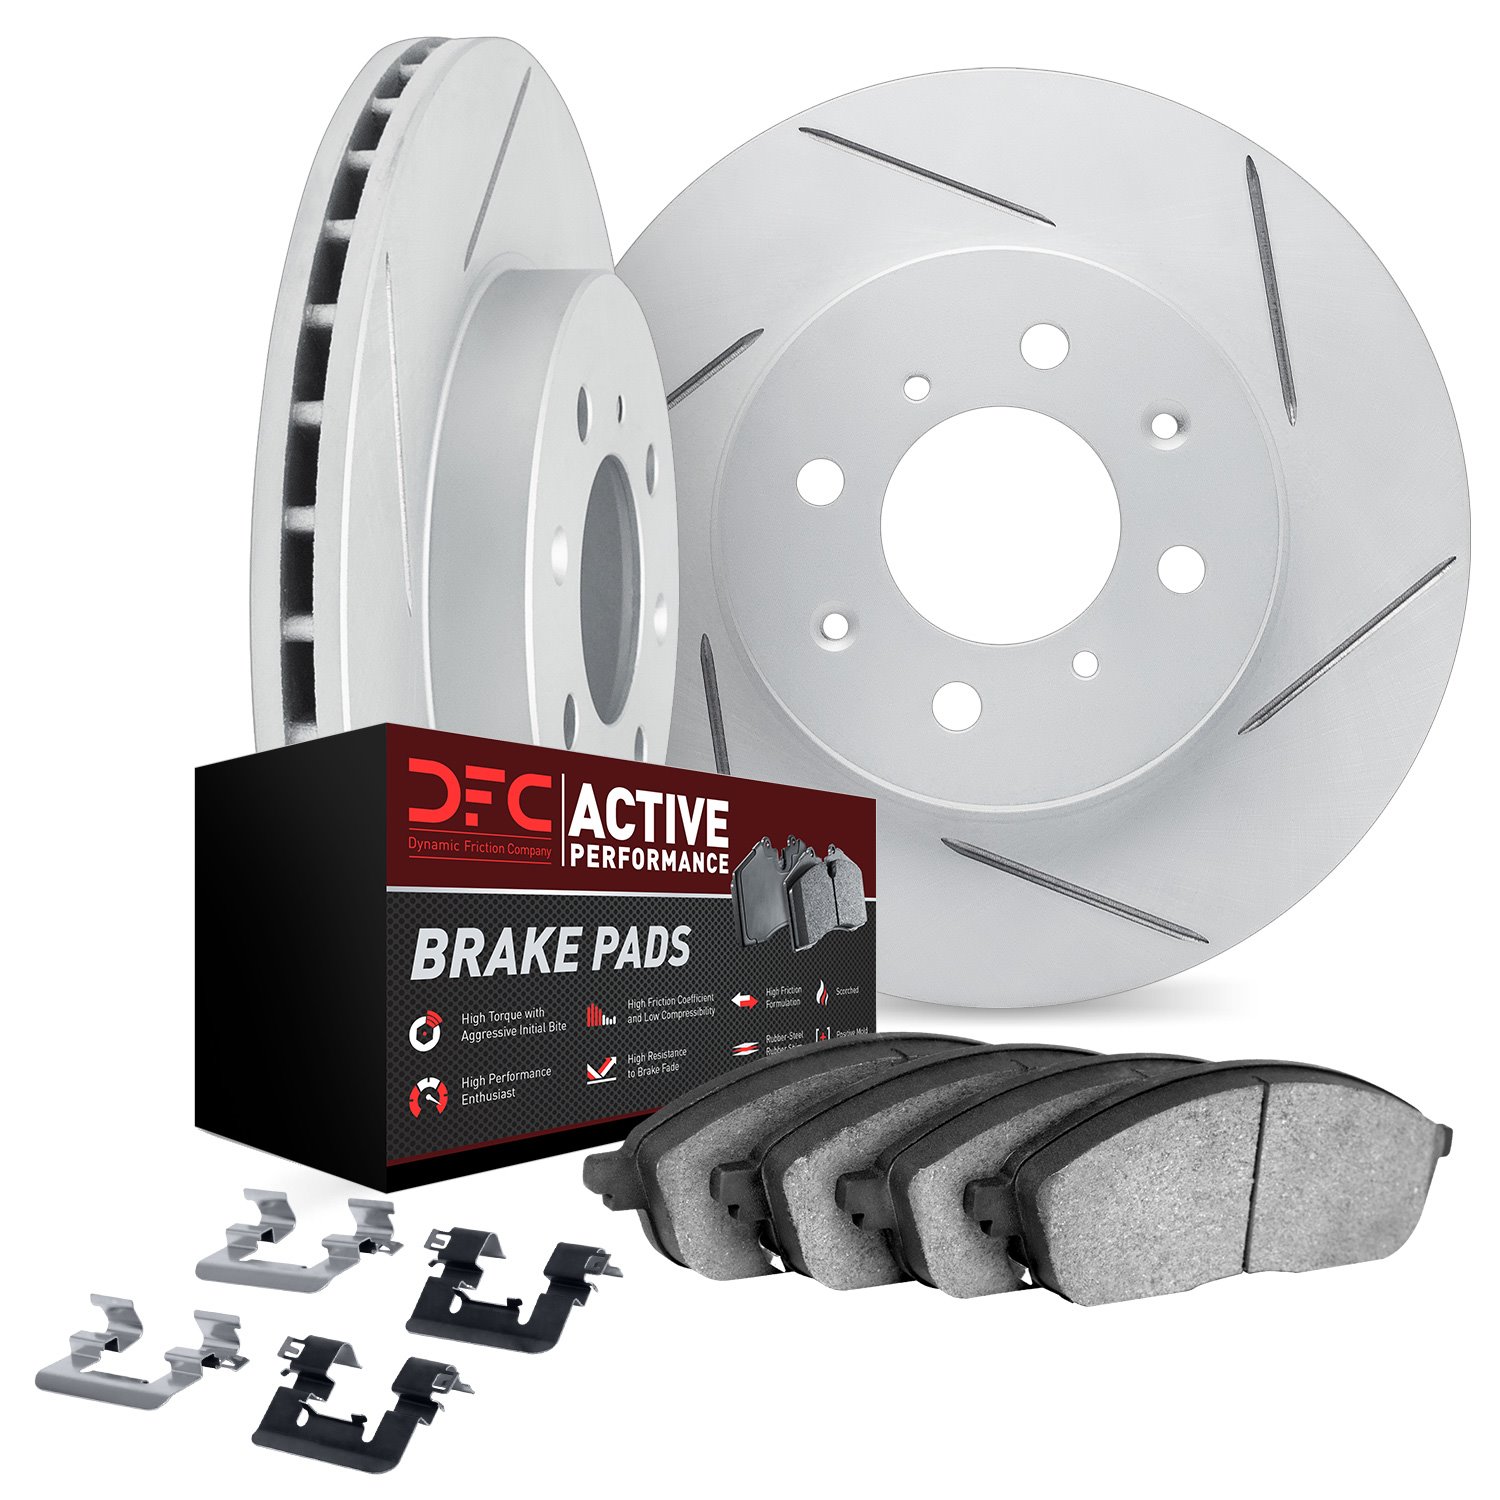 2712-59012 Geoperformance Slotted Brake Rotors with Active Performance Pads Kits & Hardware, 1996-2014 Acura/Honda, Position: Fr